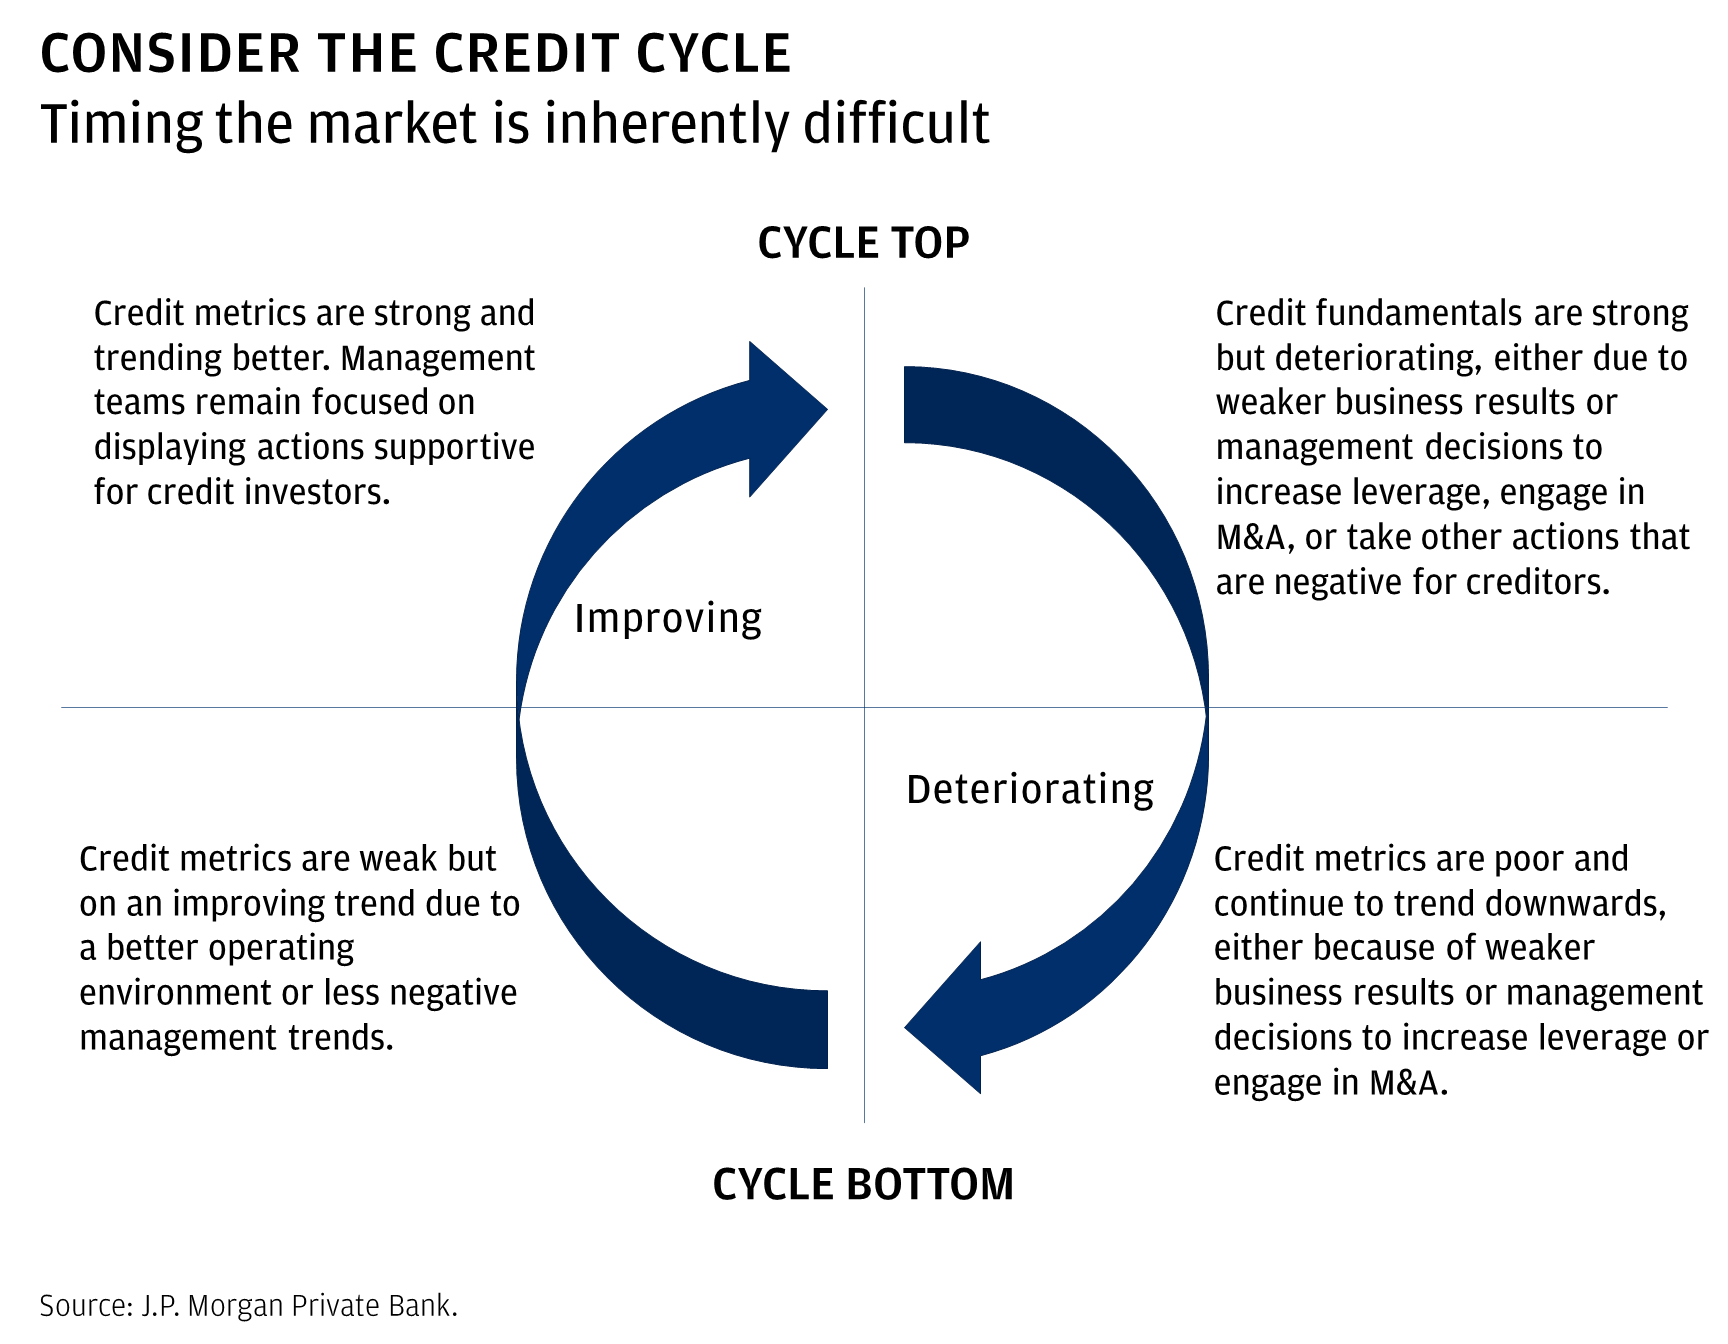 This graphic shows the difficulty of timing the market as we can quickly shift from improving to deteriorating fundamentals. At the top of the cycle, we tend to have solid credit fundamentals, but a shift in focus from  management teams from credit friendly actions to more aggressive actions that look to increase leverage or engage in M&A for example. The opposite is true at the bottom of the cycle, as companies have weak credit metrics and look to improve management trends as the operating environment improves.